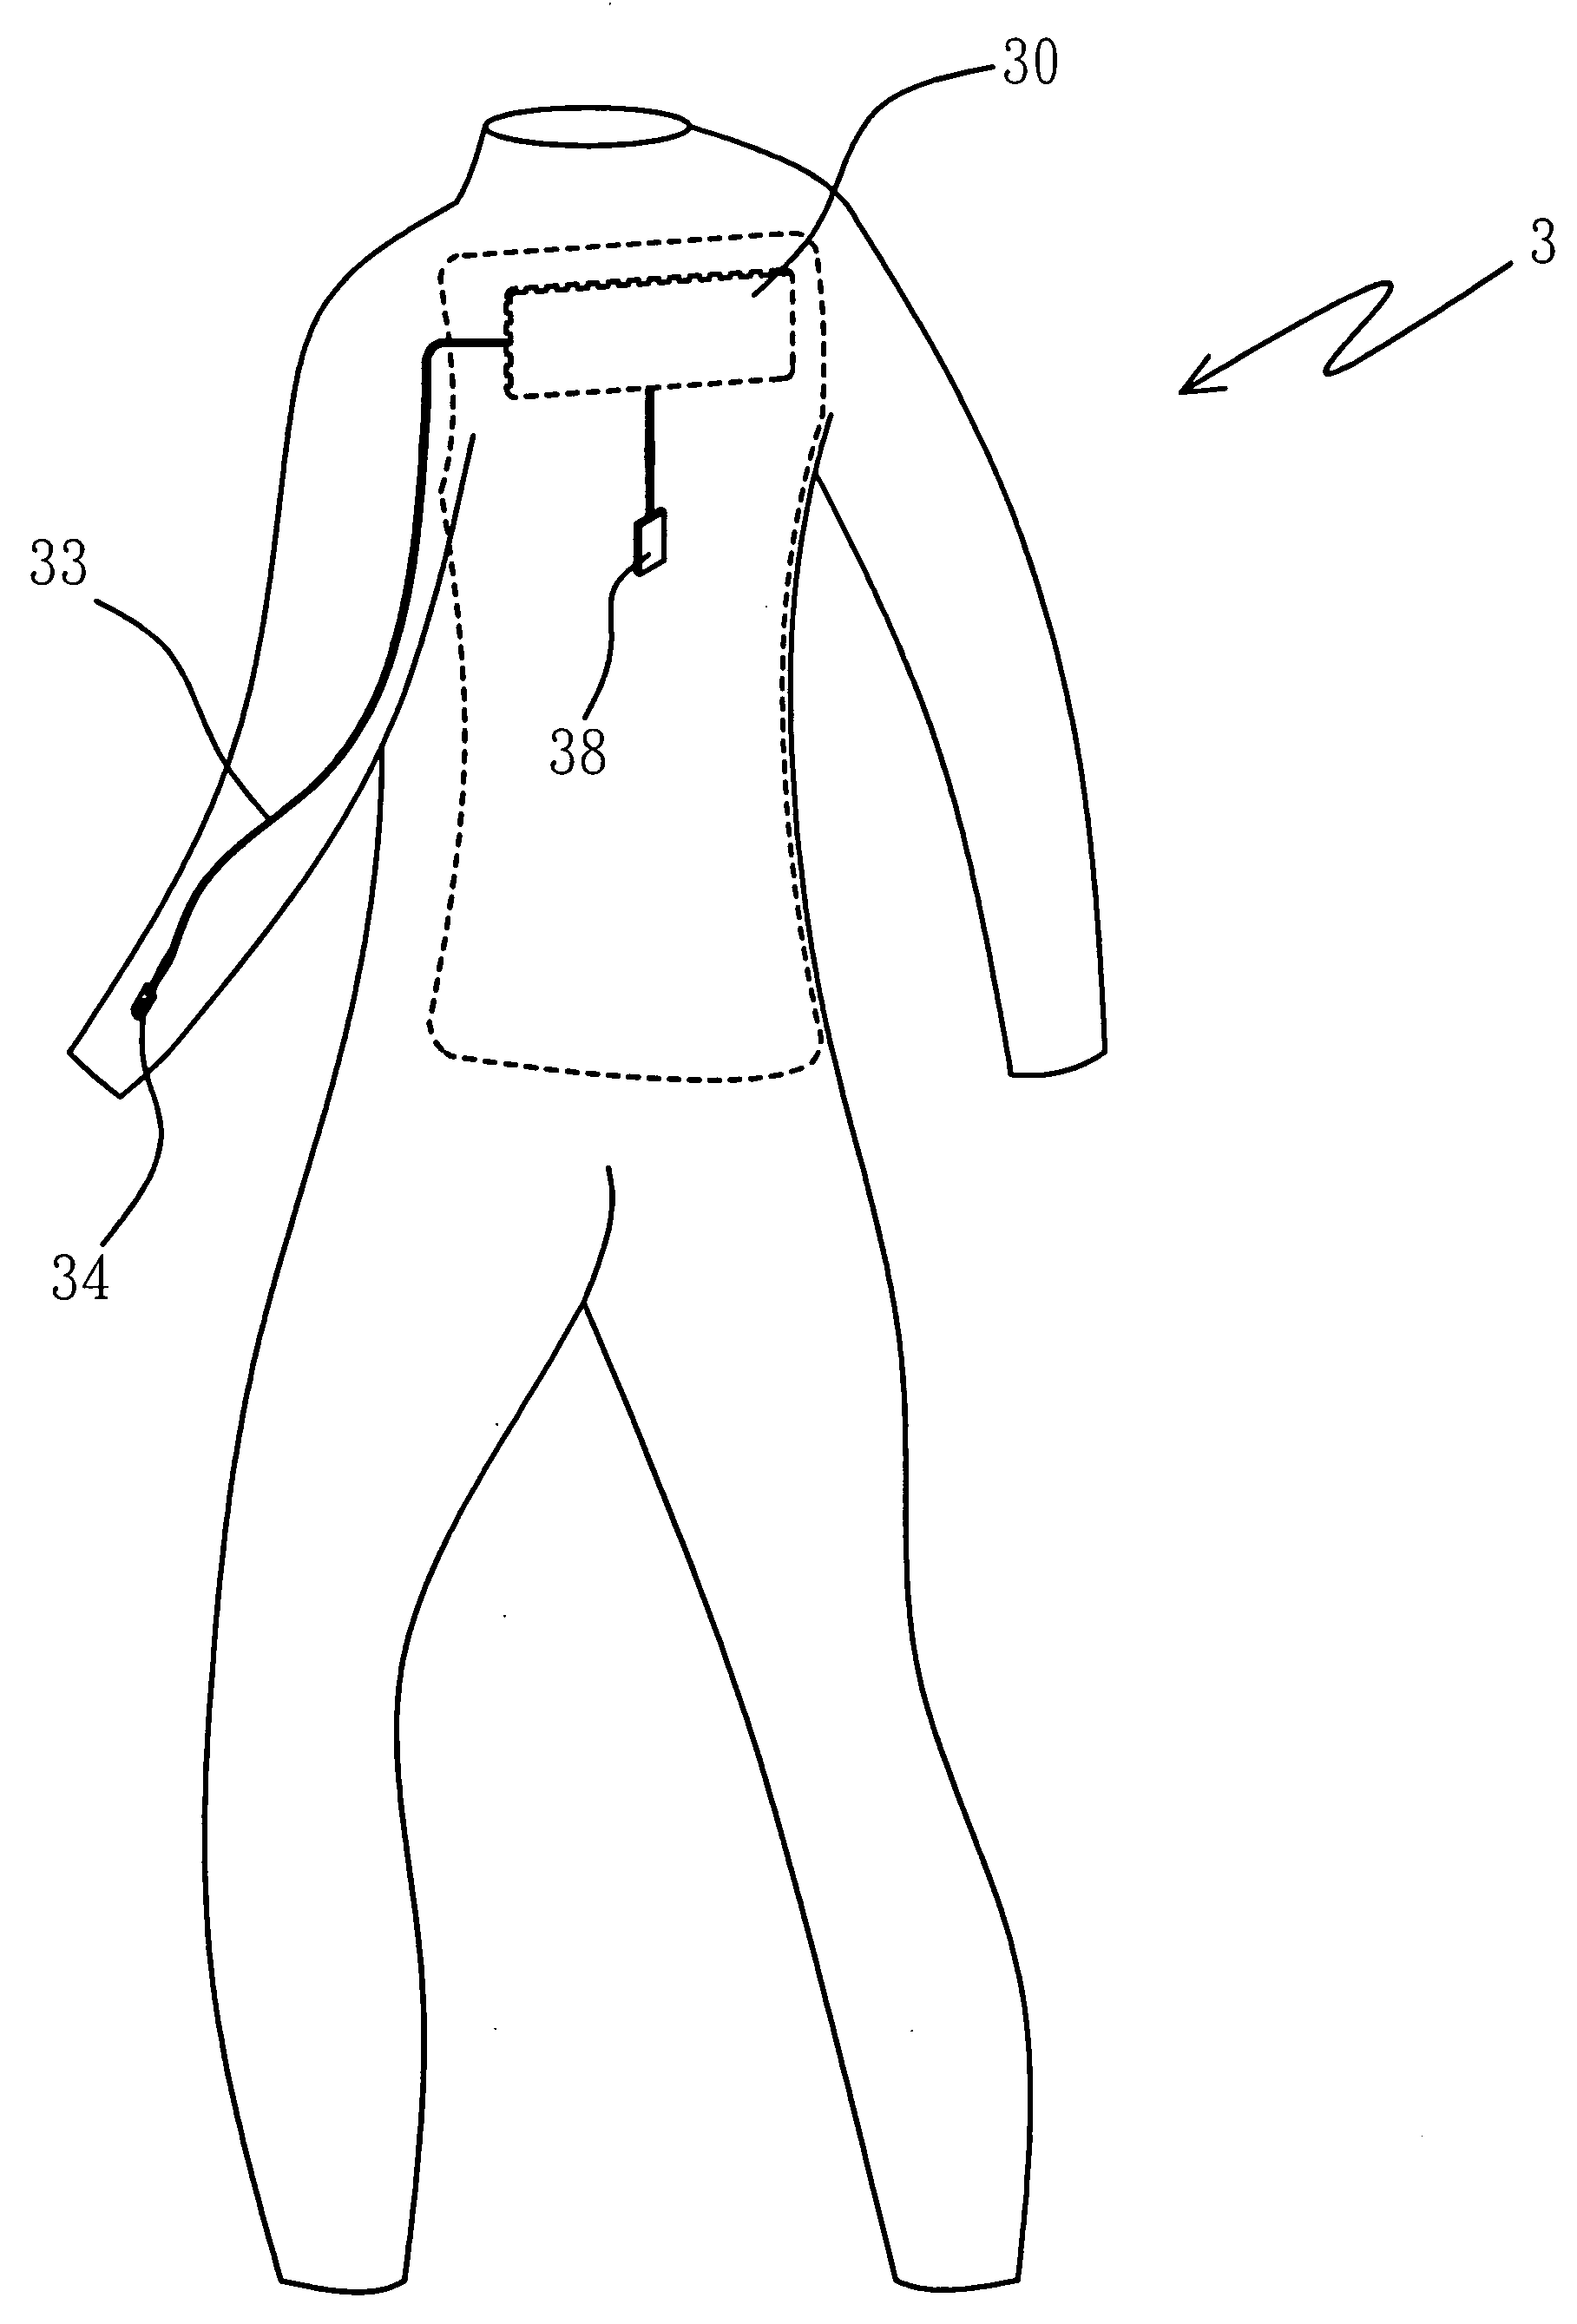 Garment with heating assembly